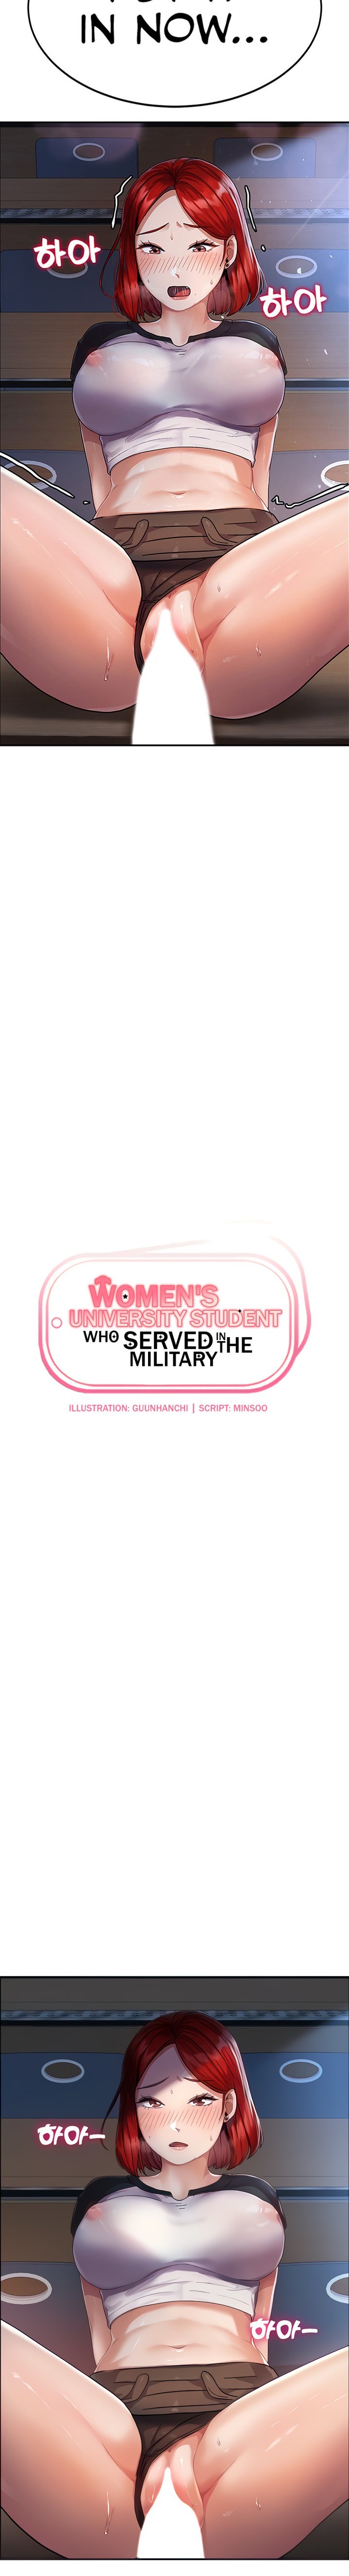 Women’s University Student who Served in the Military - Chapter 4 Page 2